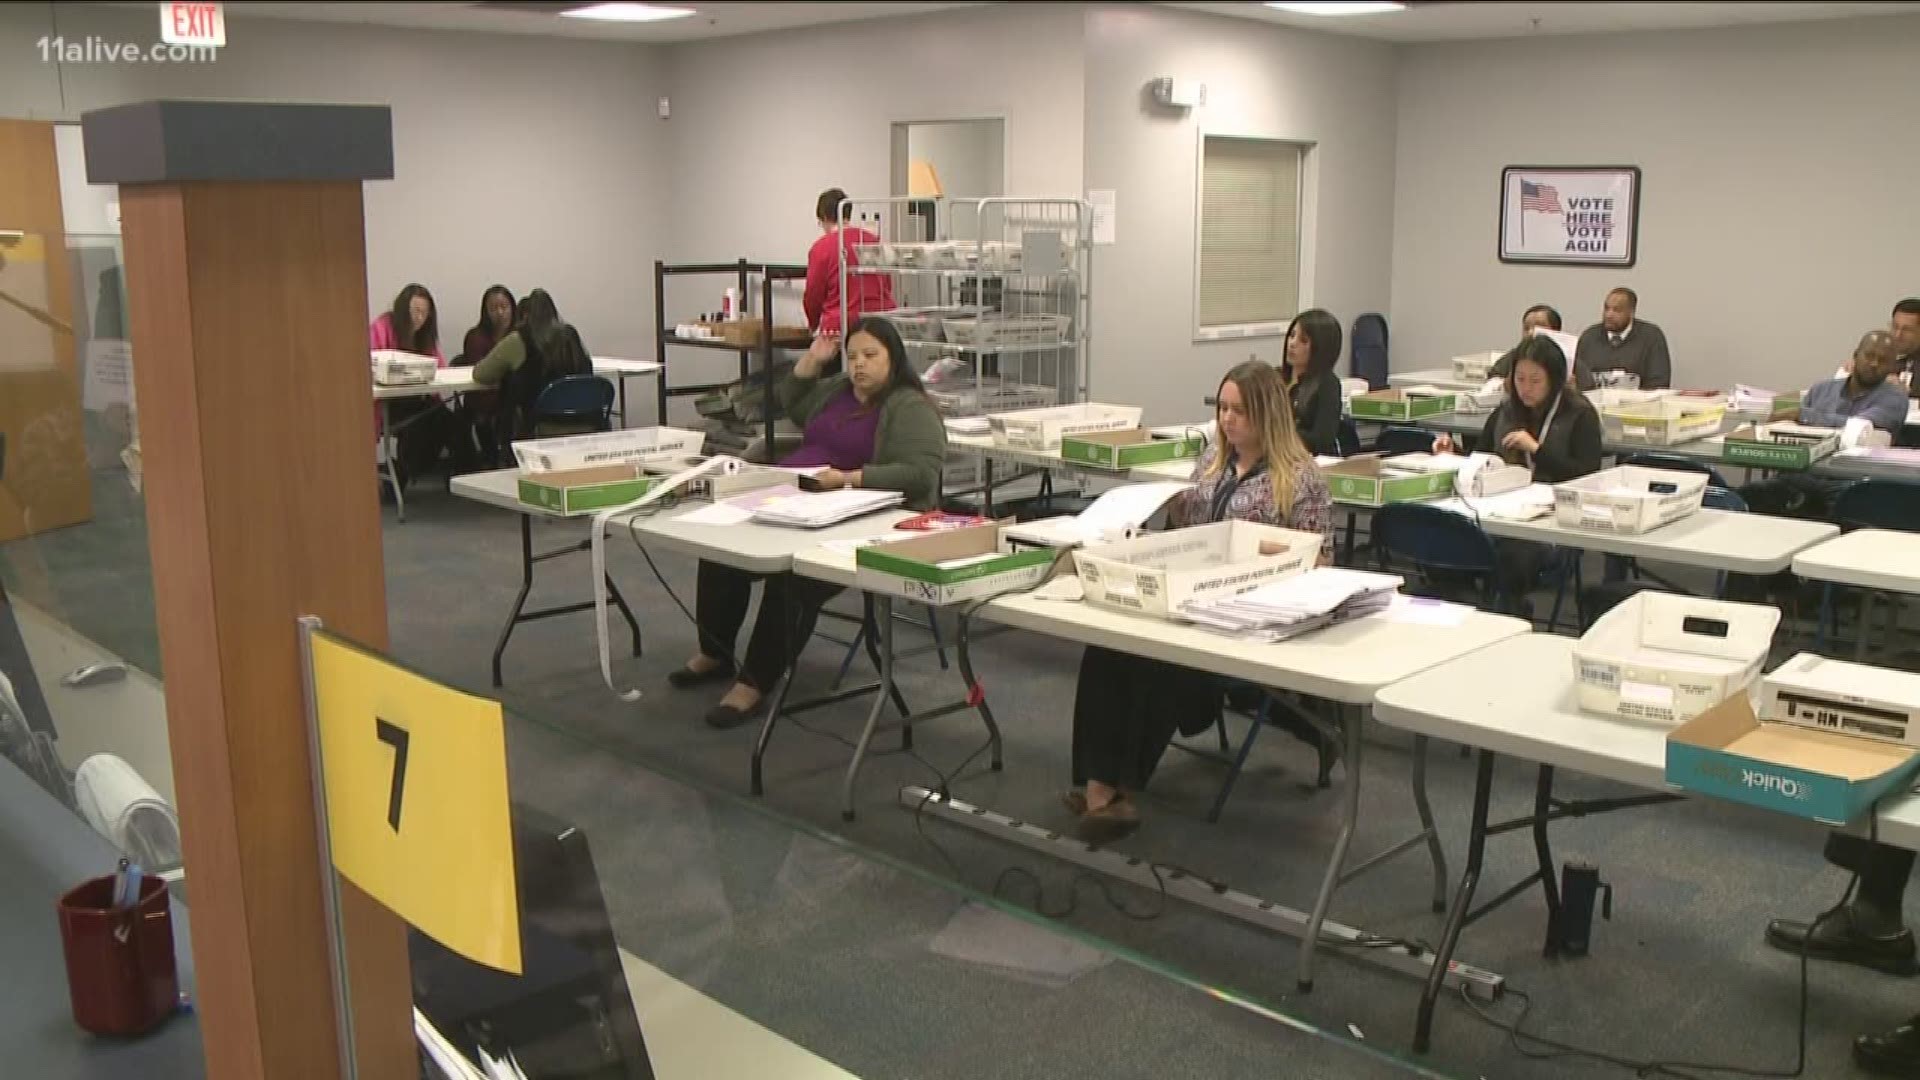 The deadline for Secretary of State to certify the state's election results is Nov. 20 at 5 p.m.